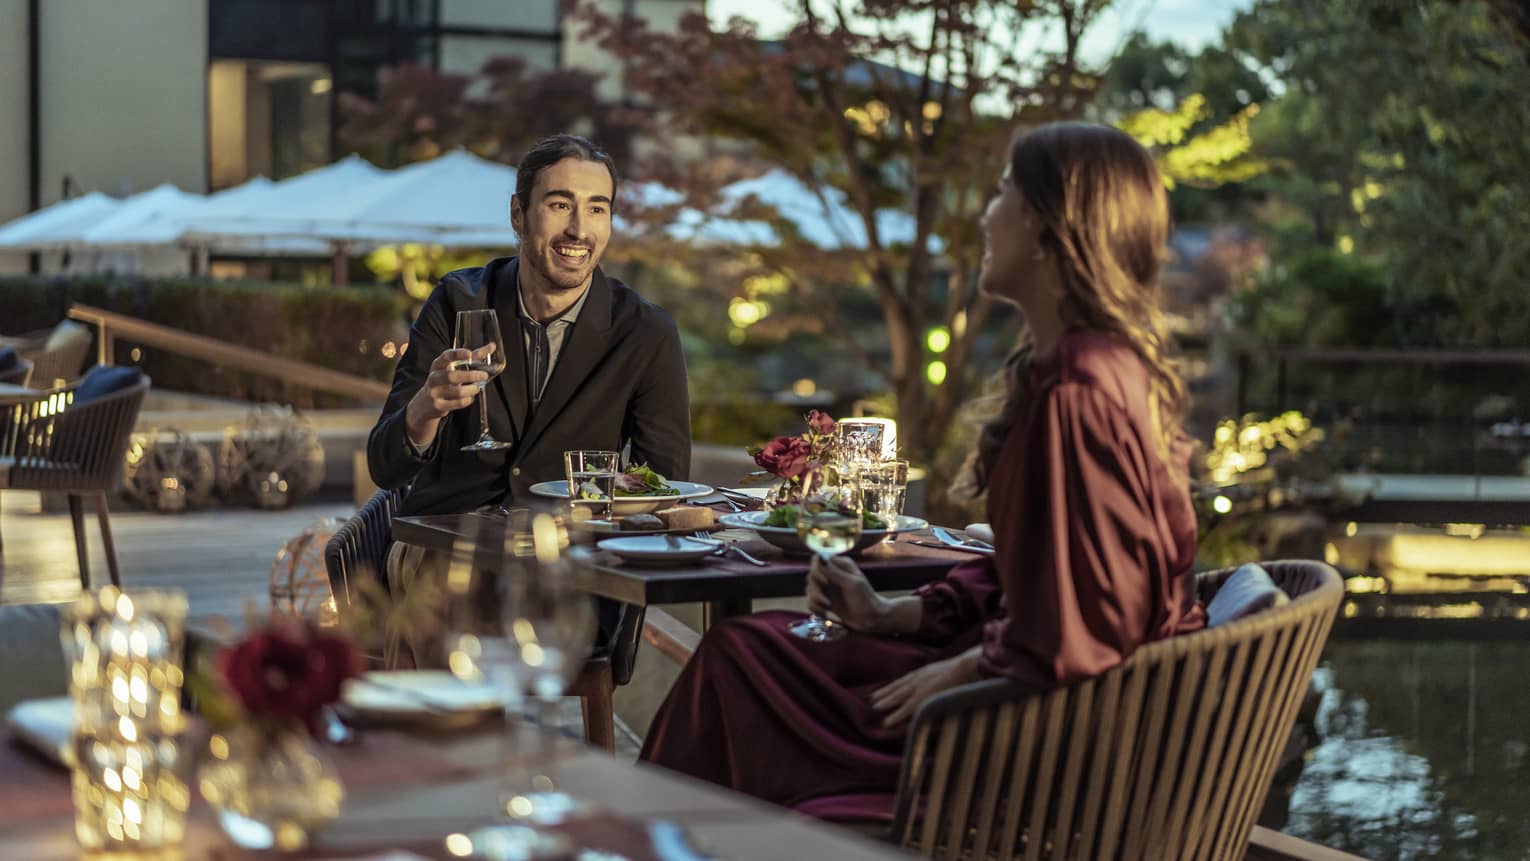 Couple enjoys a romantic meal at dusk on Brasserie?s outdoor terrace with views of Shakusui-en pond garden